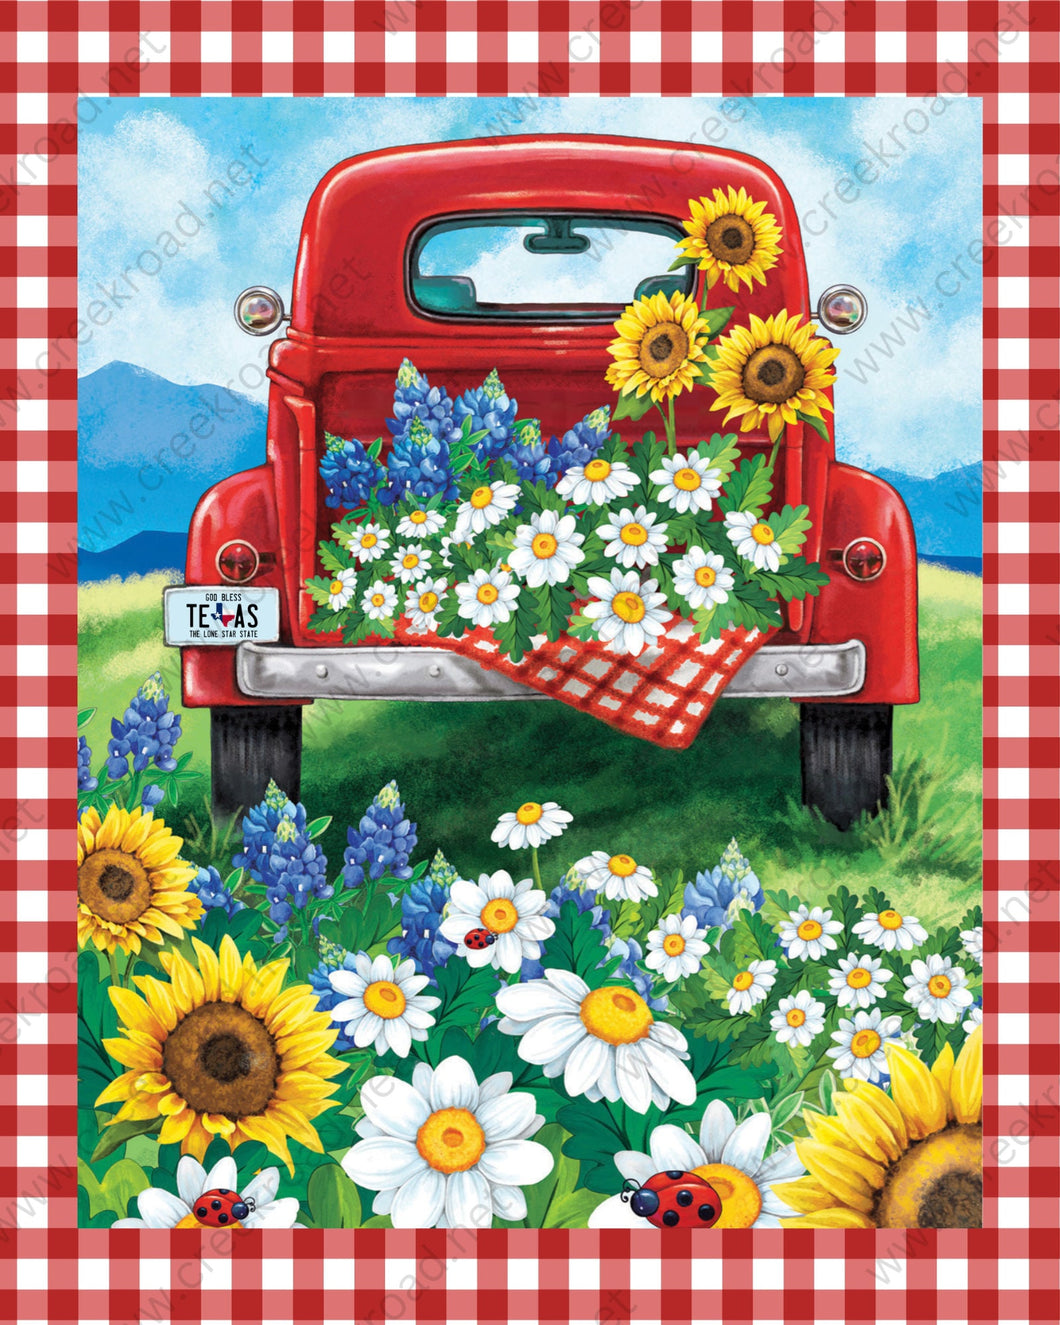 Red Truck in Spring Meadow of Sunflowers Bluebonnets Daisies Red Gingham Wreath Sign-Lady Bug-Flowers-8.00